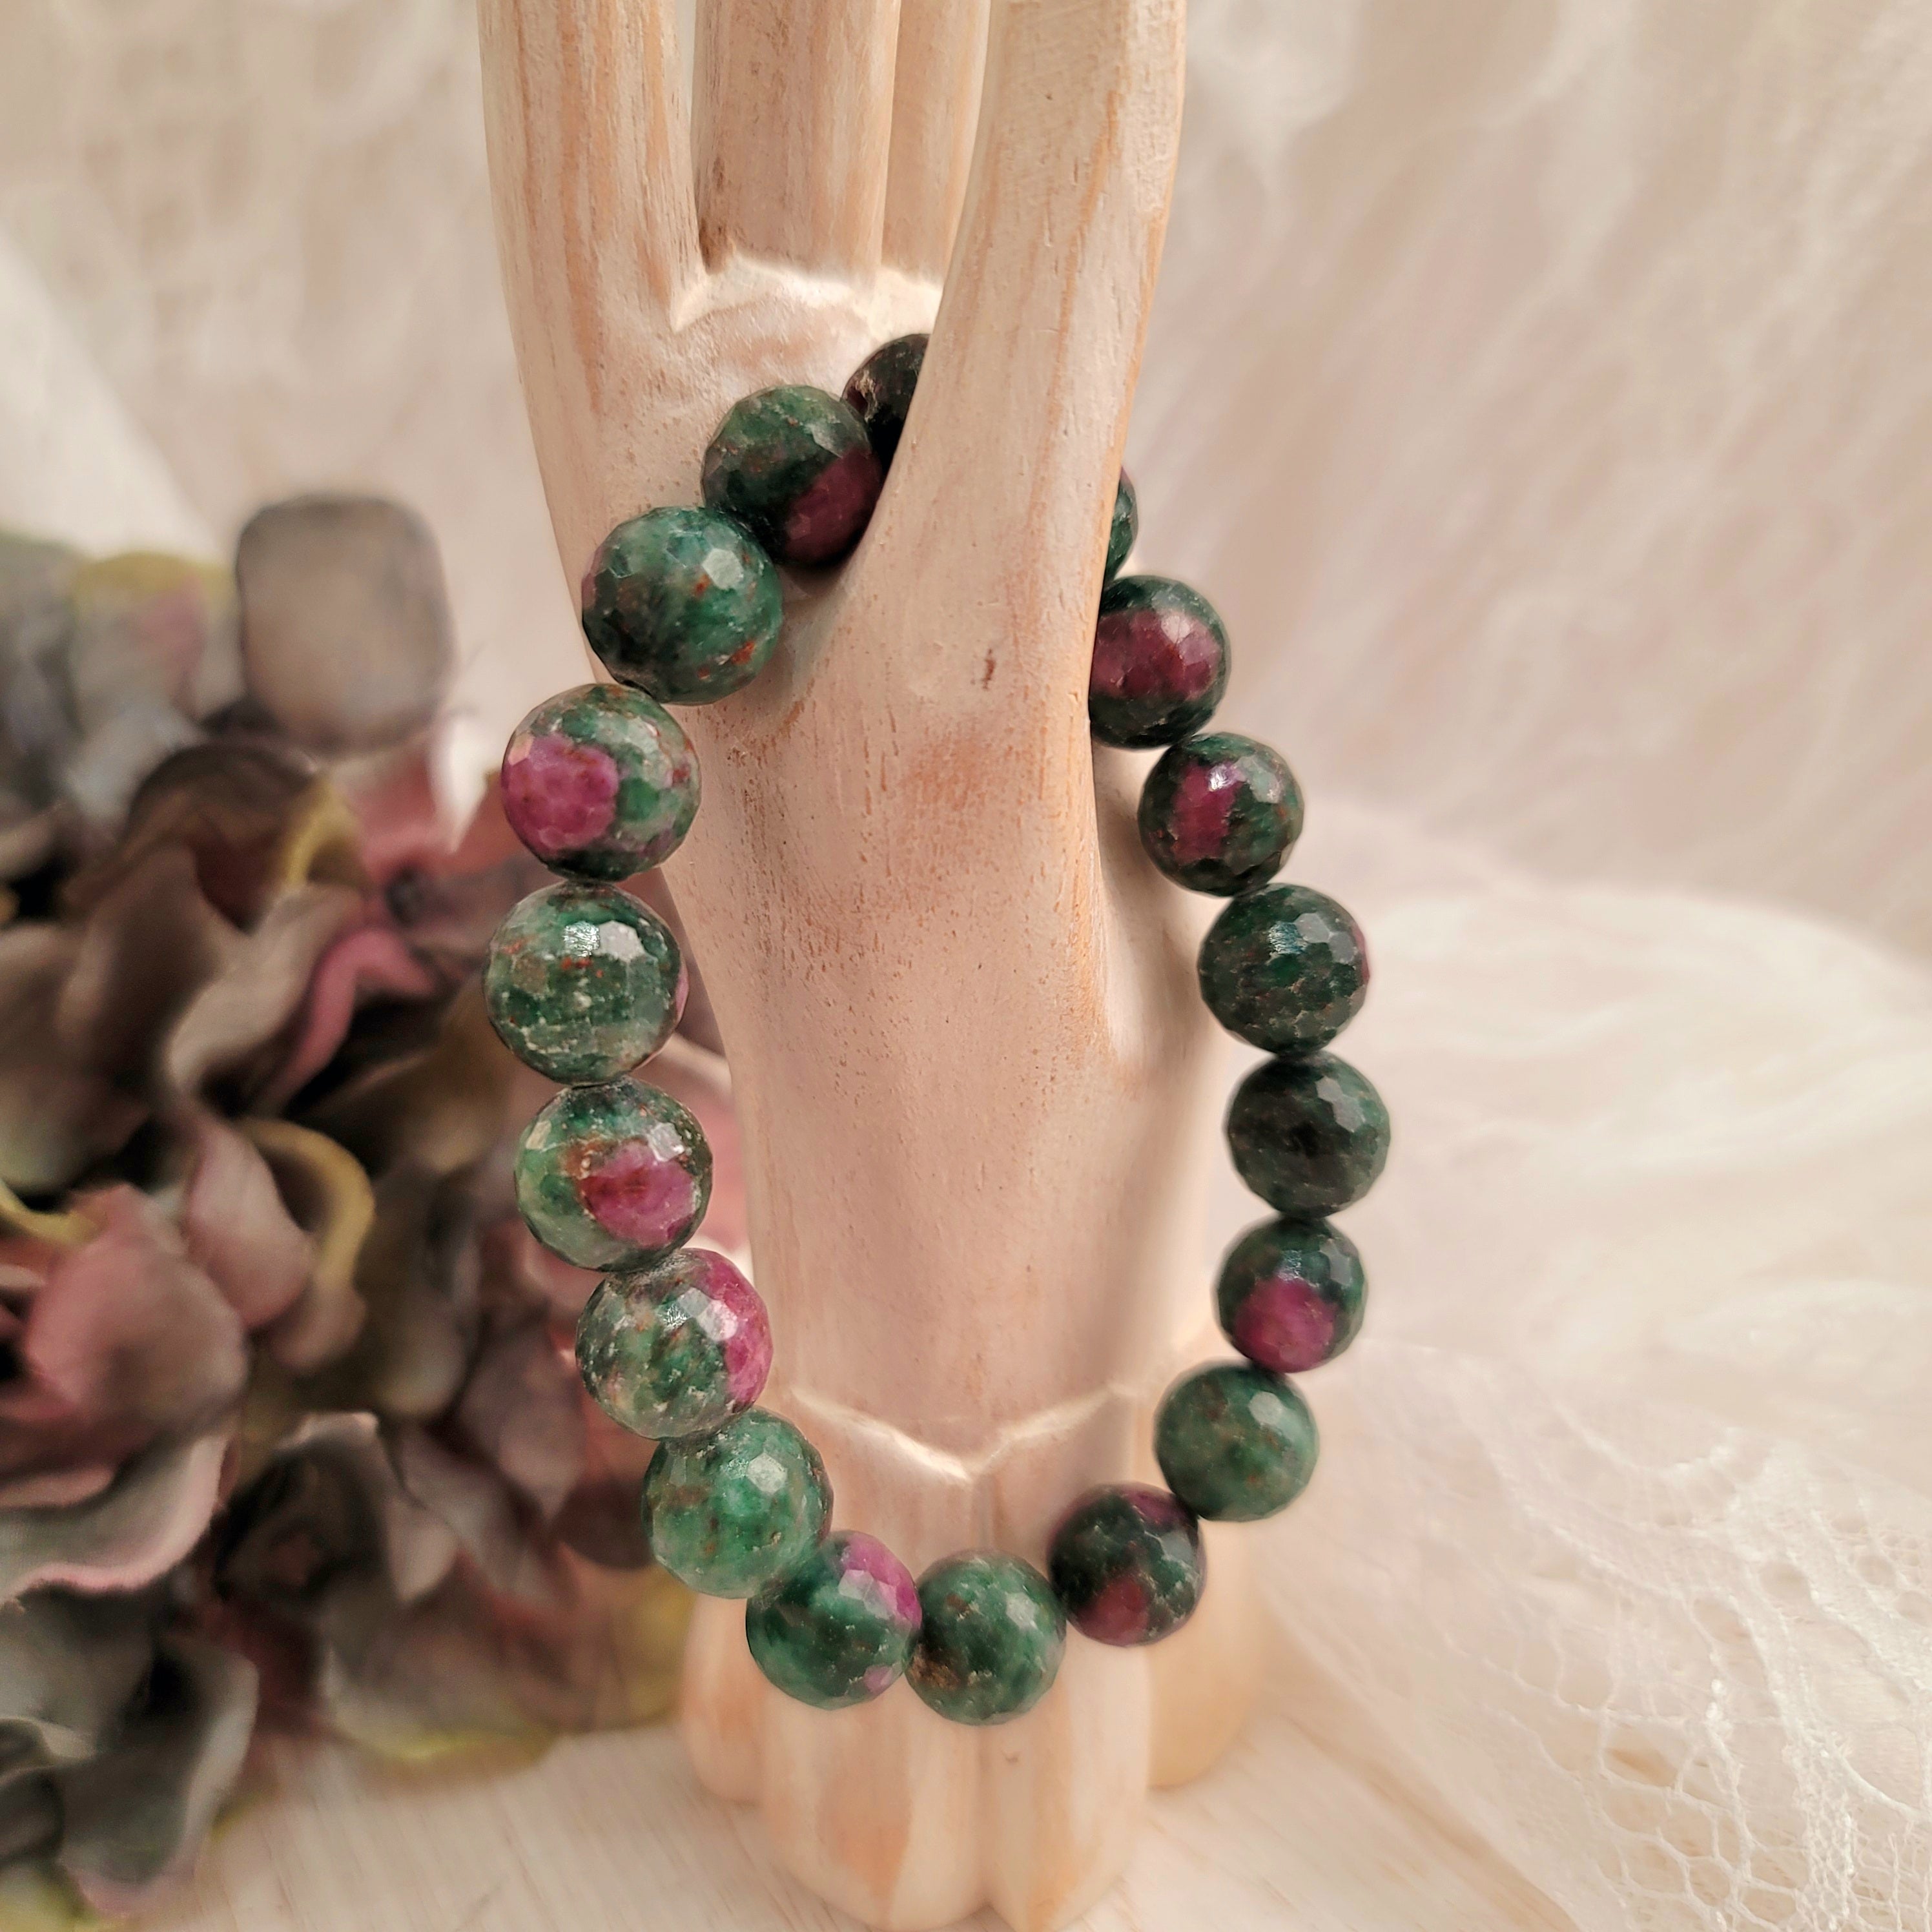 Ruby Fuschite Faceted Bracelet for Courage, Strength and Passion